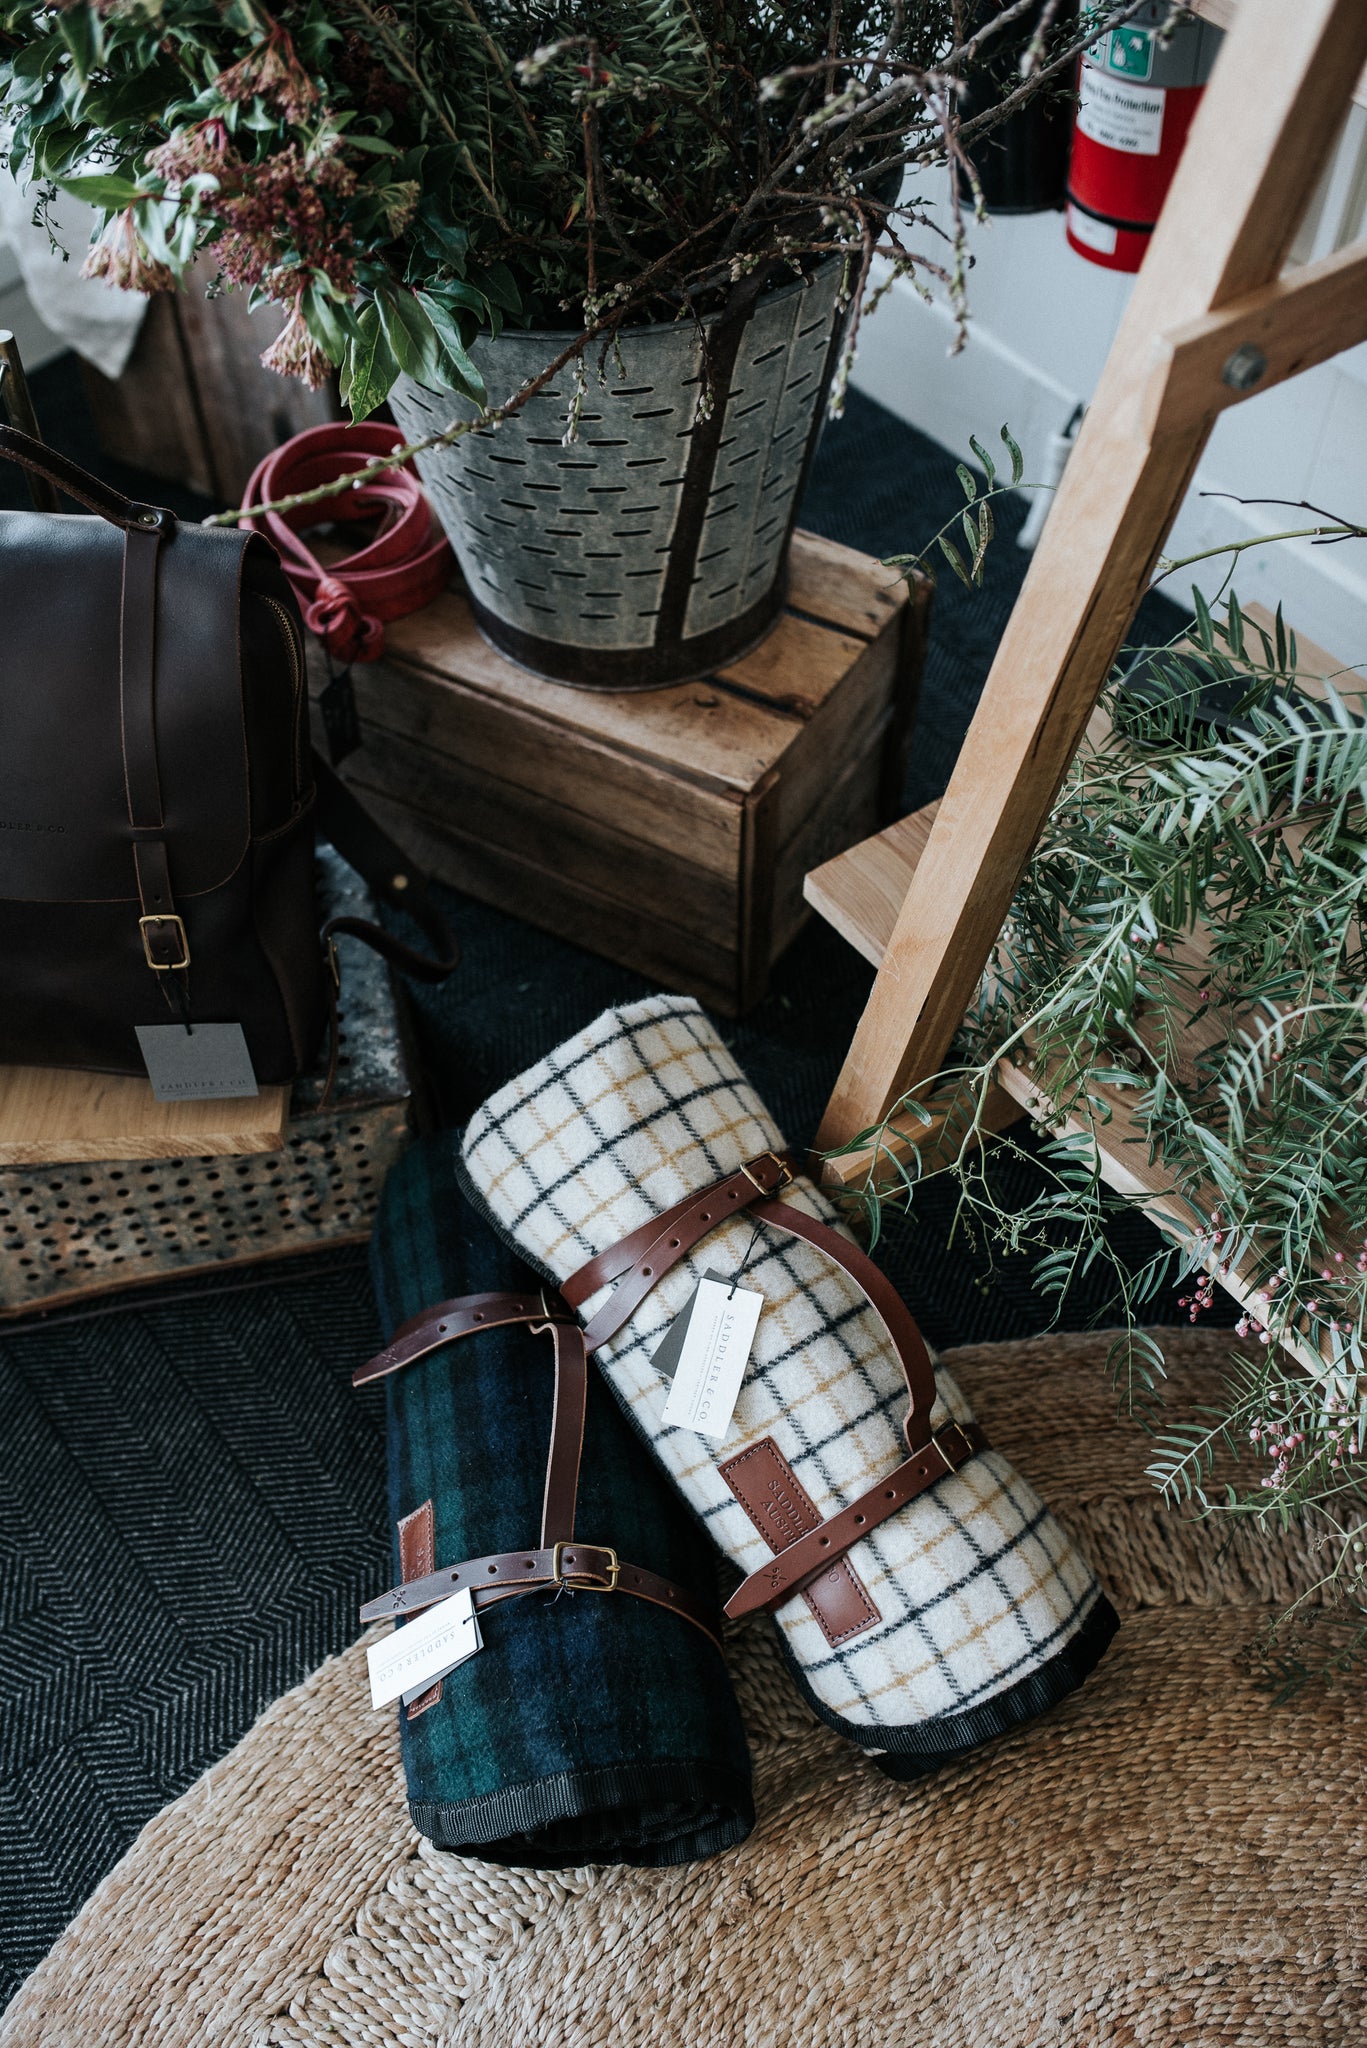 Wool and leather Picnic blankets in Wellington Popup shop, featuring Armadillo & Co rug